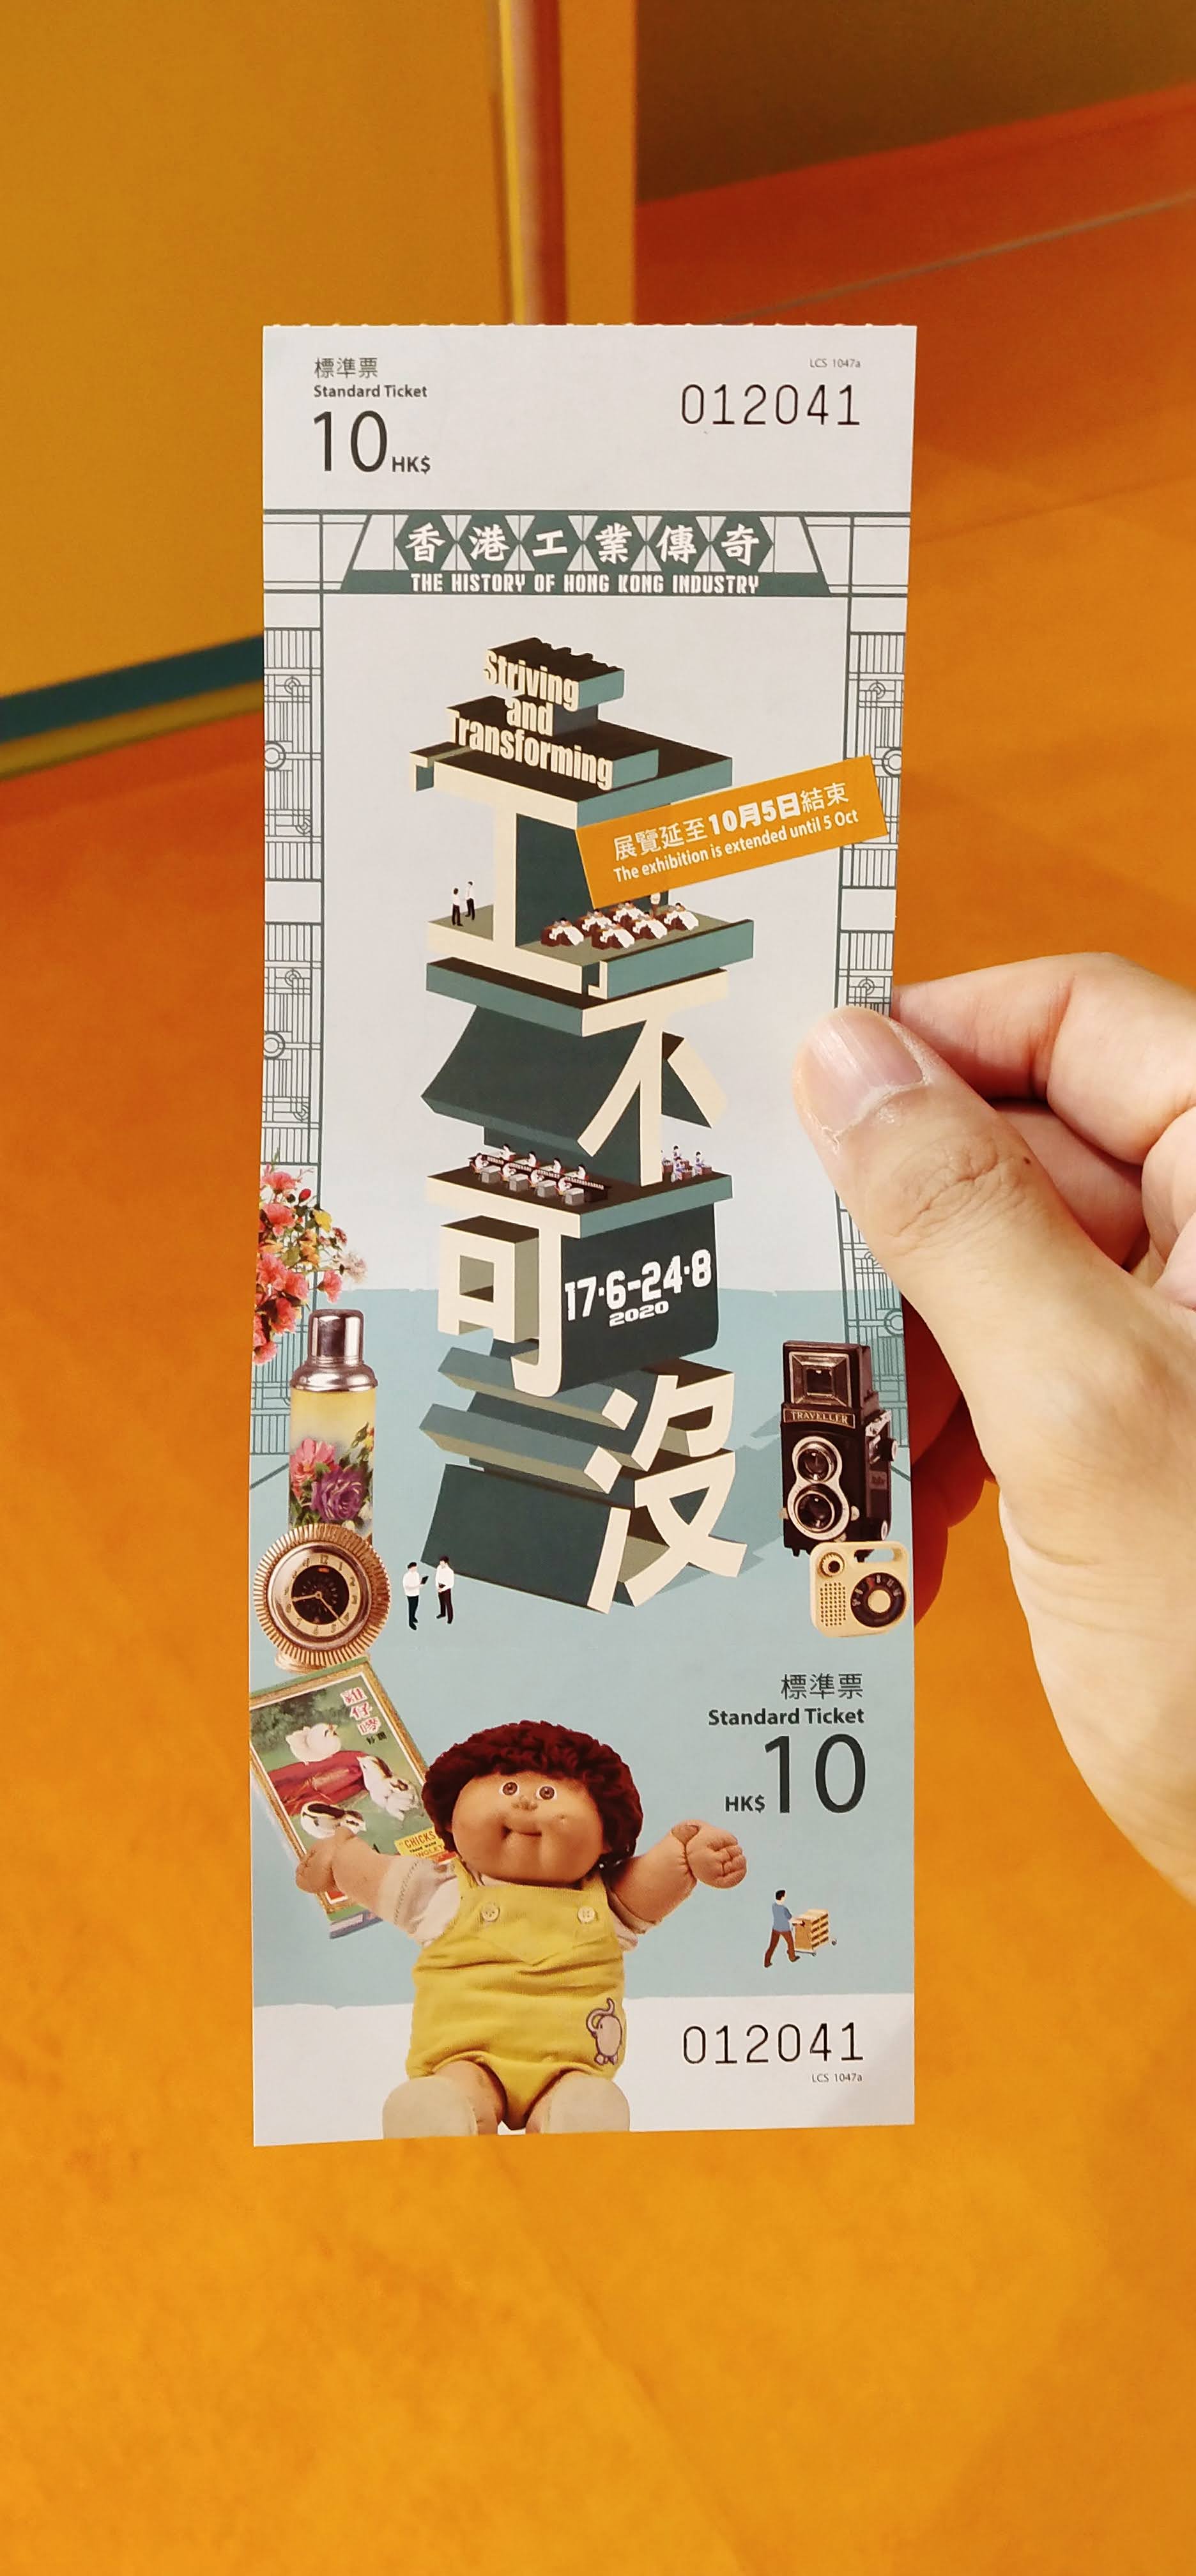 Ticket for exhibition for the history of Hong Kong industry at Hong Kong Museum of History